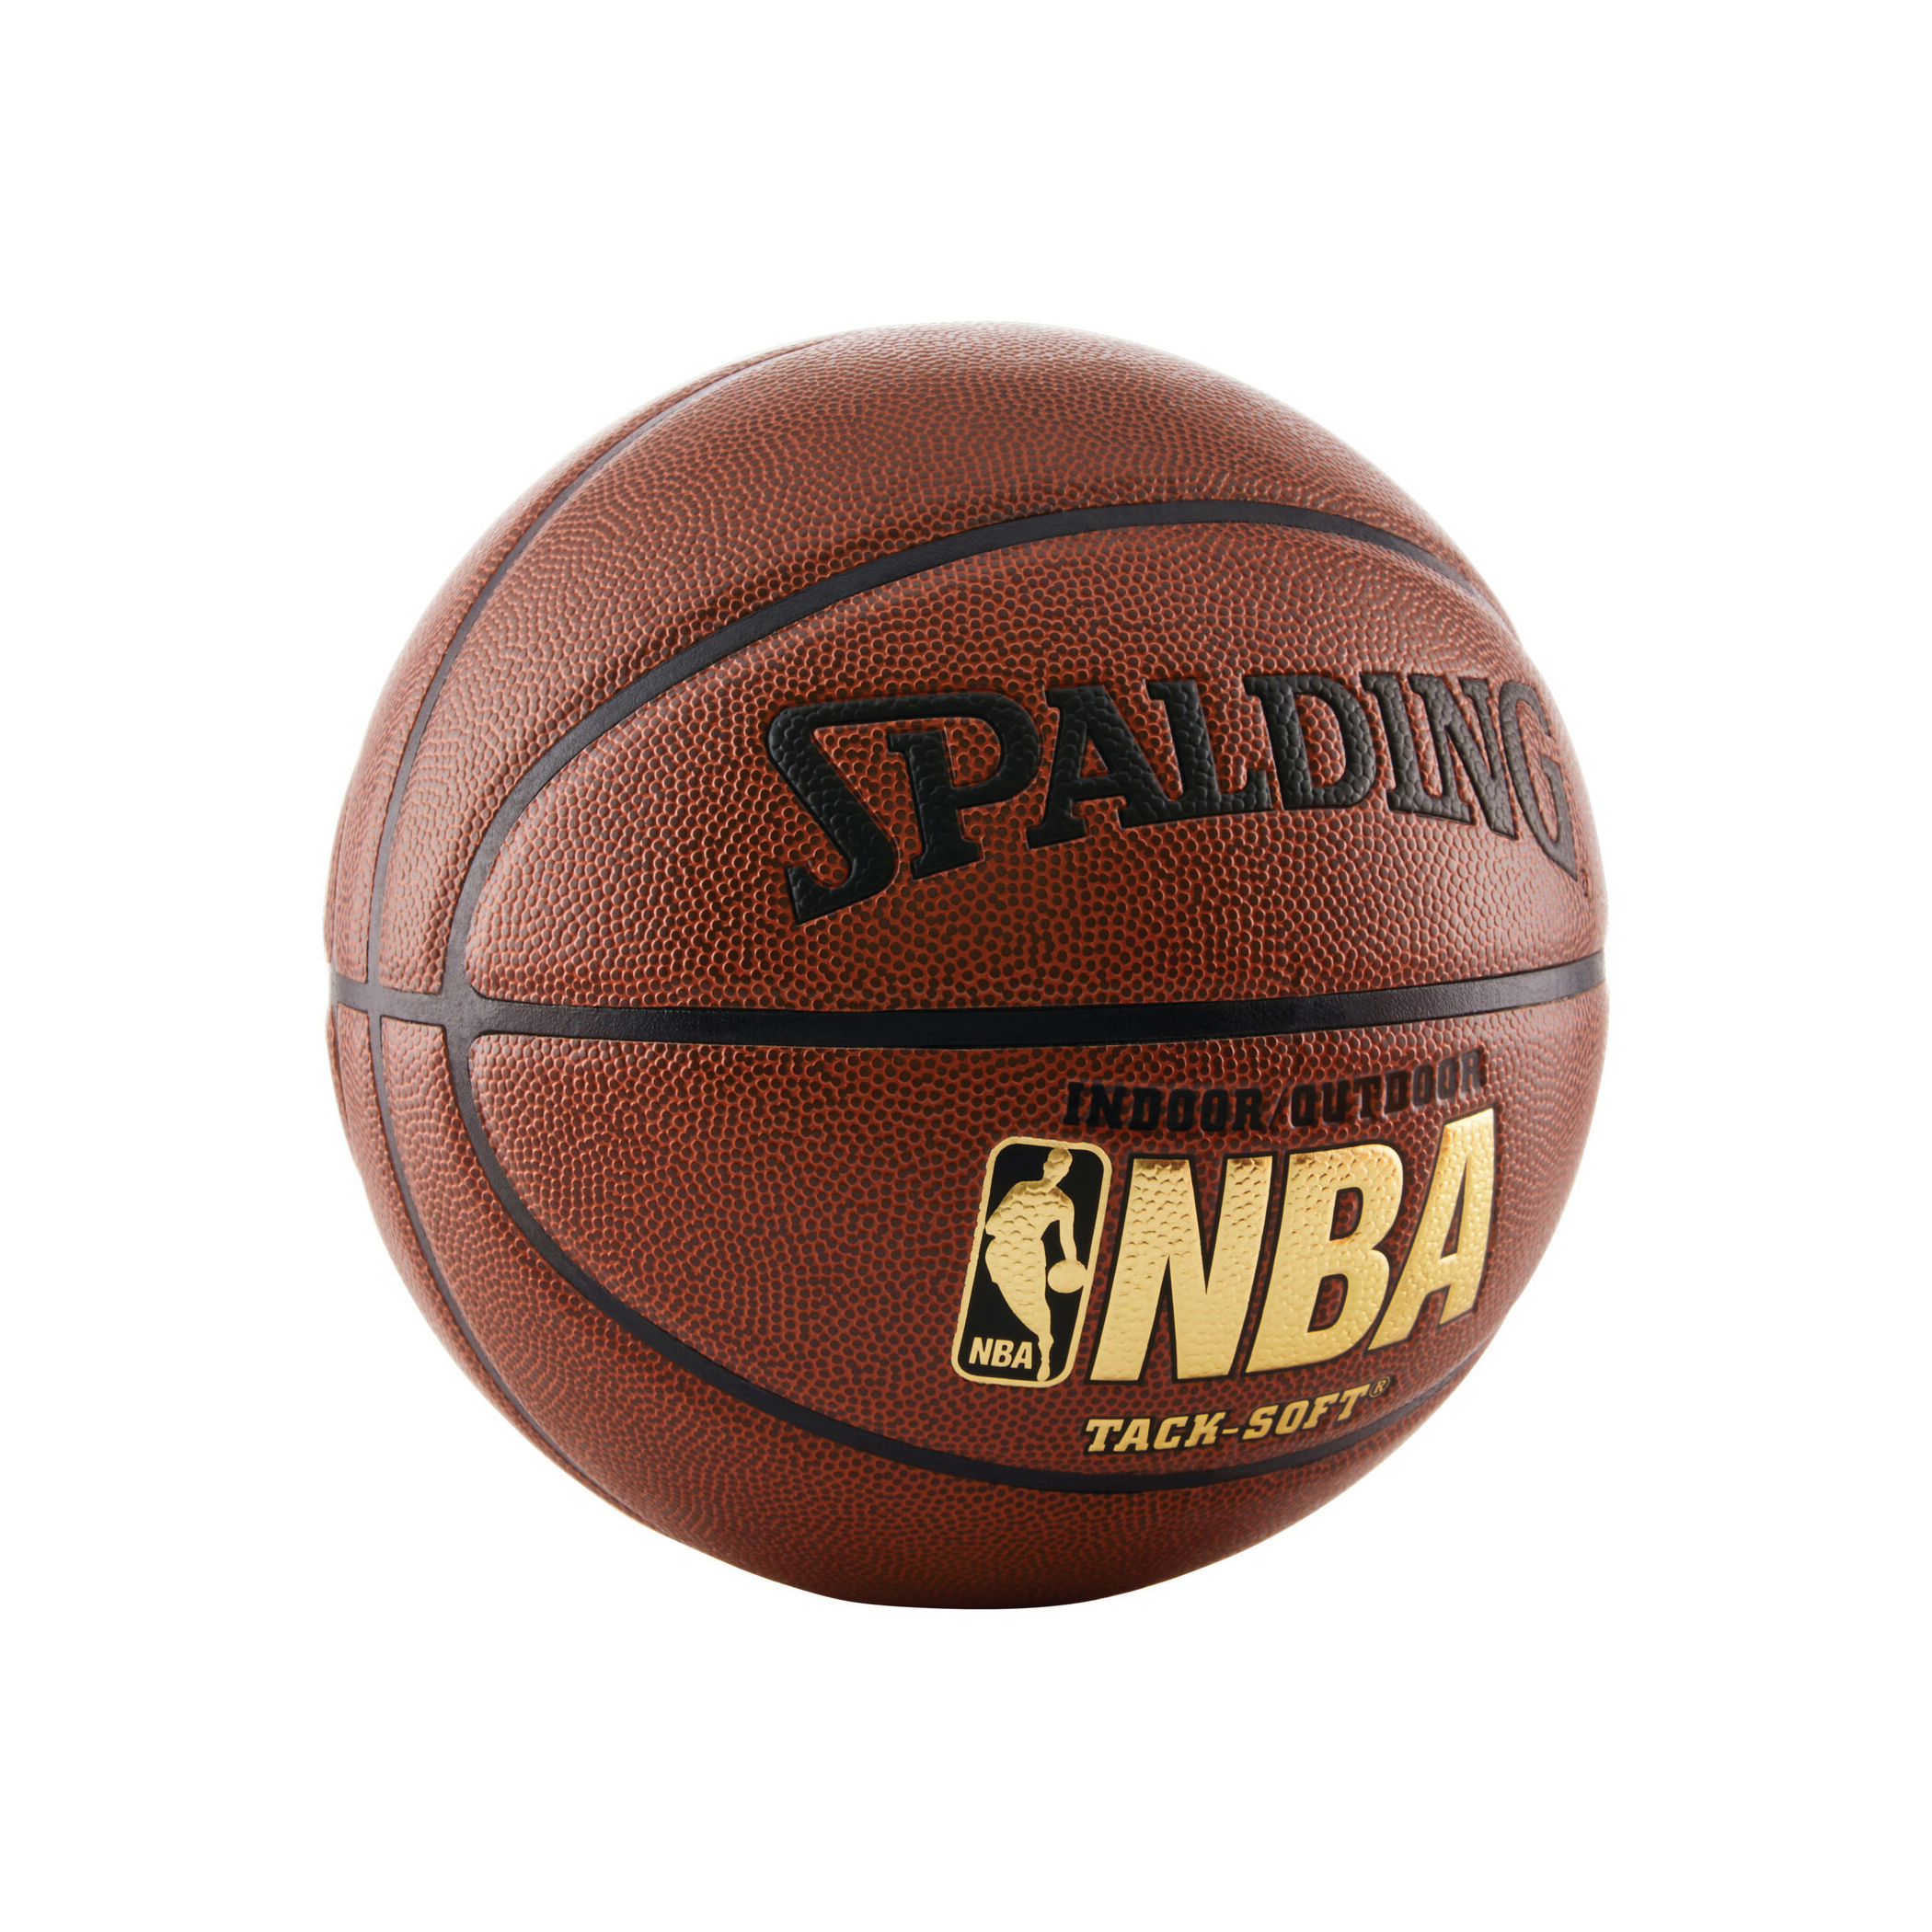 Spalding 64-435 Basketball, 29-1/2 in Dia, Leather - 2